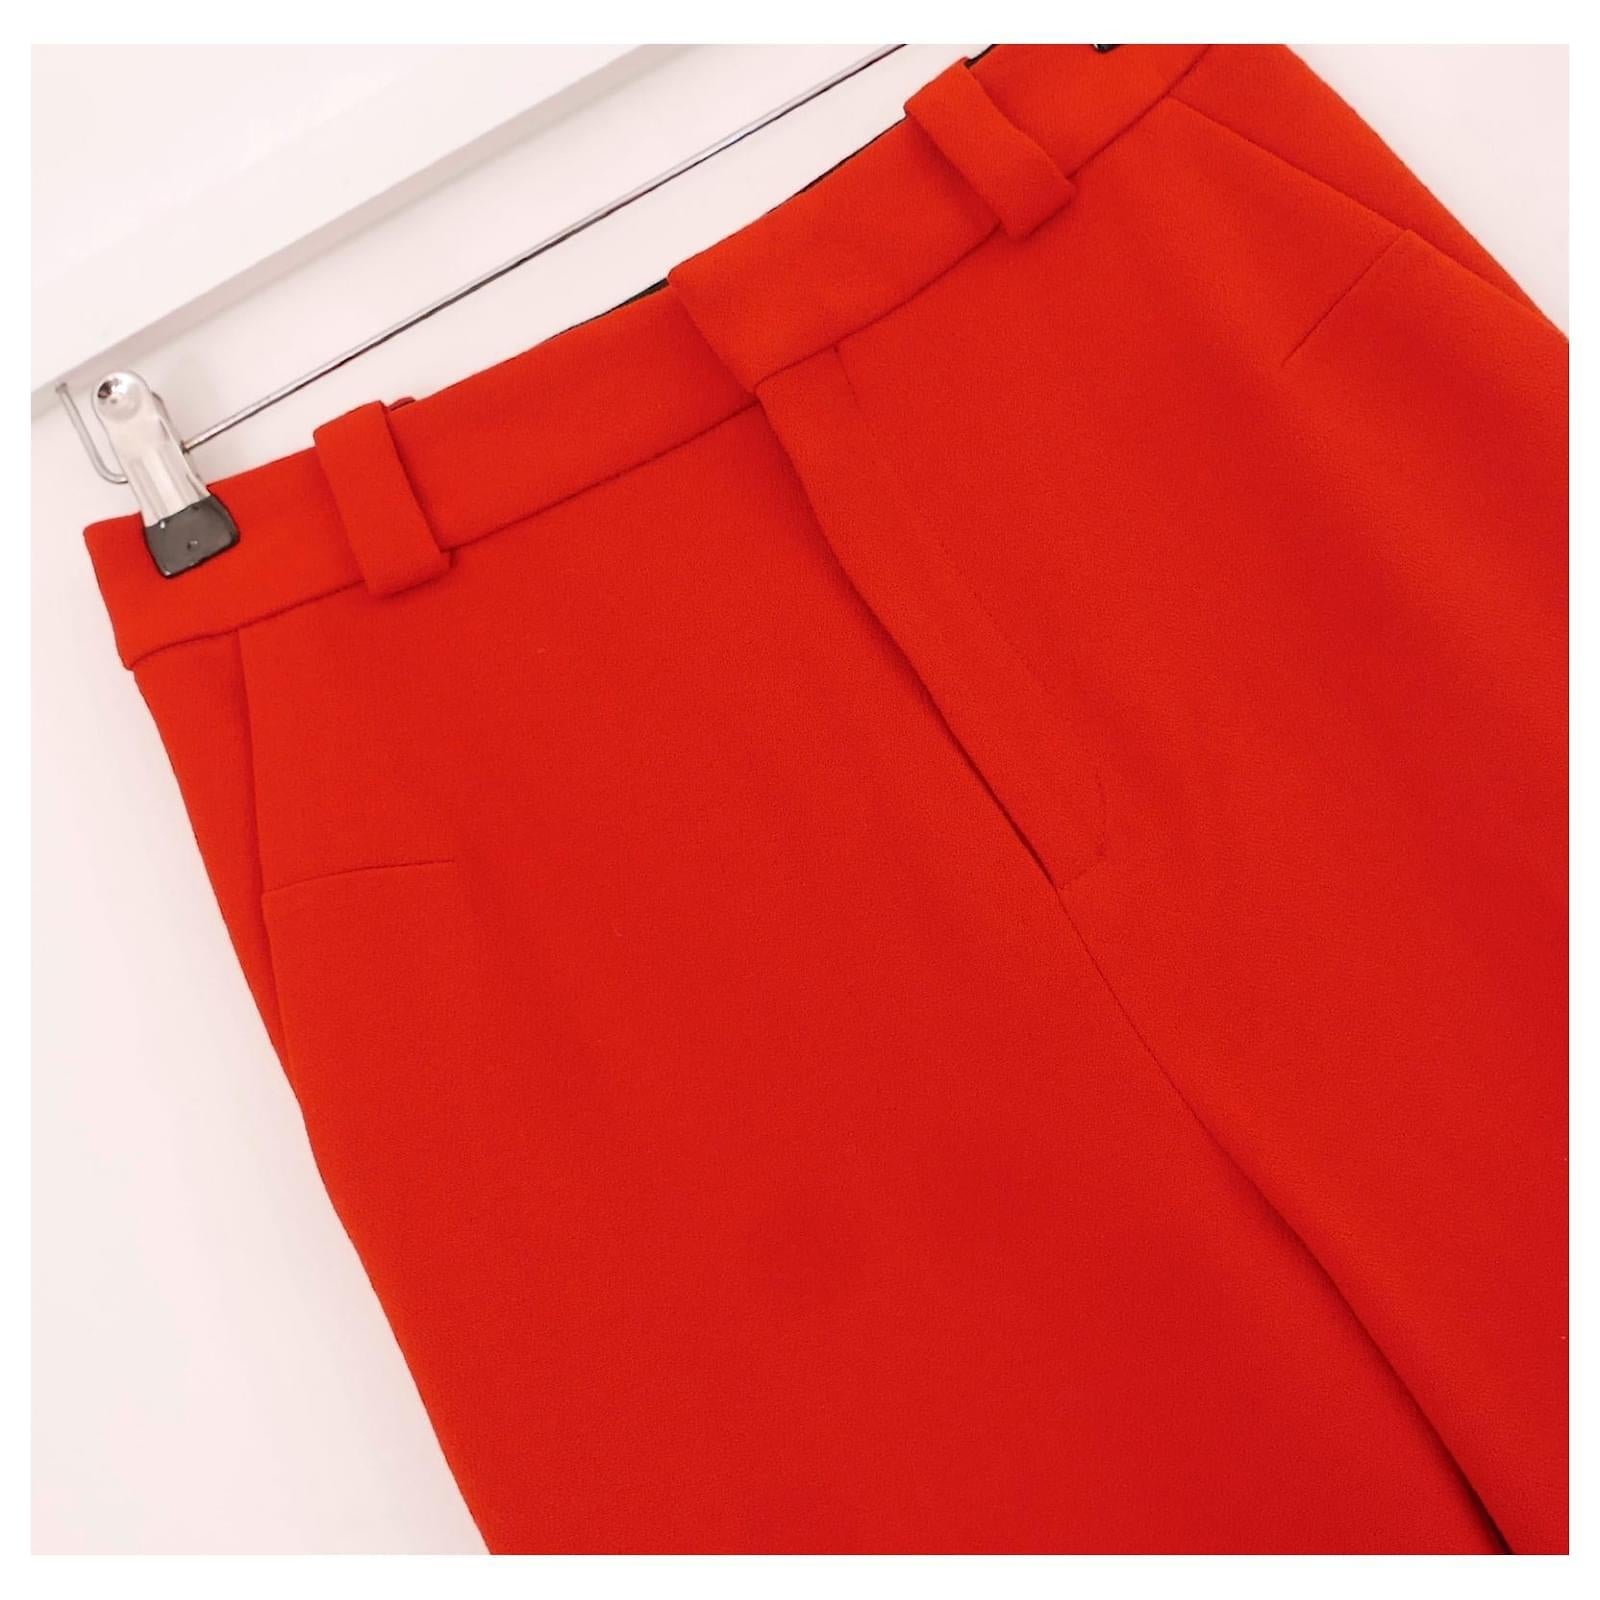 Super festive Roland Mouret Dilman pants - bought for $795 and new with tags. Made from Poppy Red structured polyester/viscose crepe, they have a high waisteded, flared cropped legs with slits to hem and feature stitching to front. Size UK6/FR34.